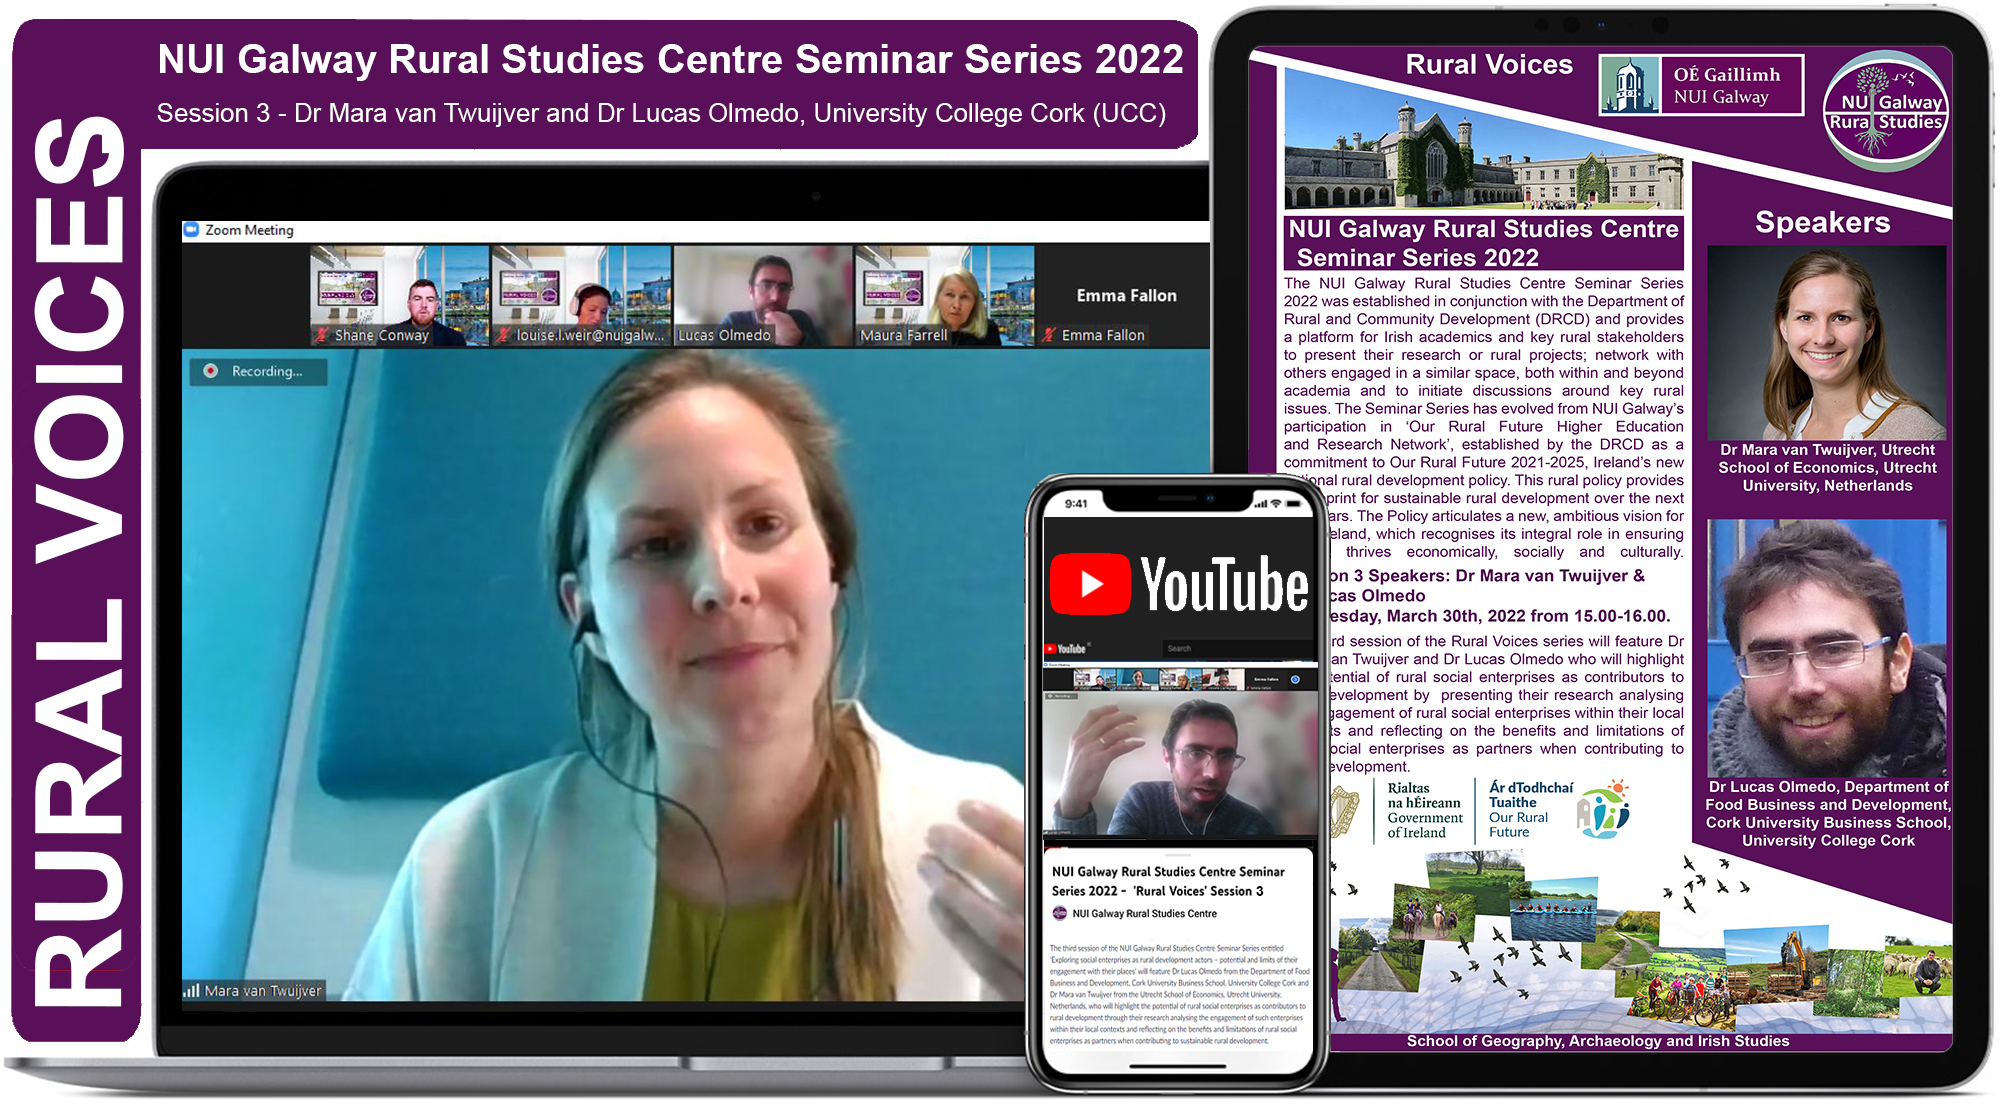 You can now watch the 3rd session of NUI Galway's new Rural Voices Seminar Series on the Rural Studi